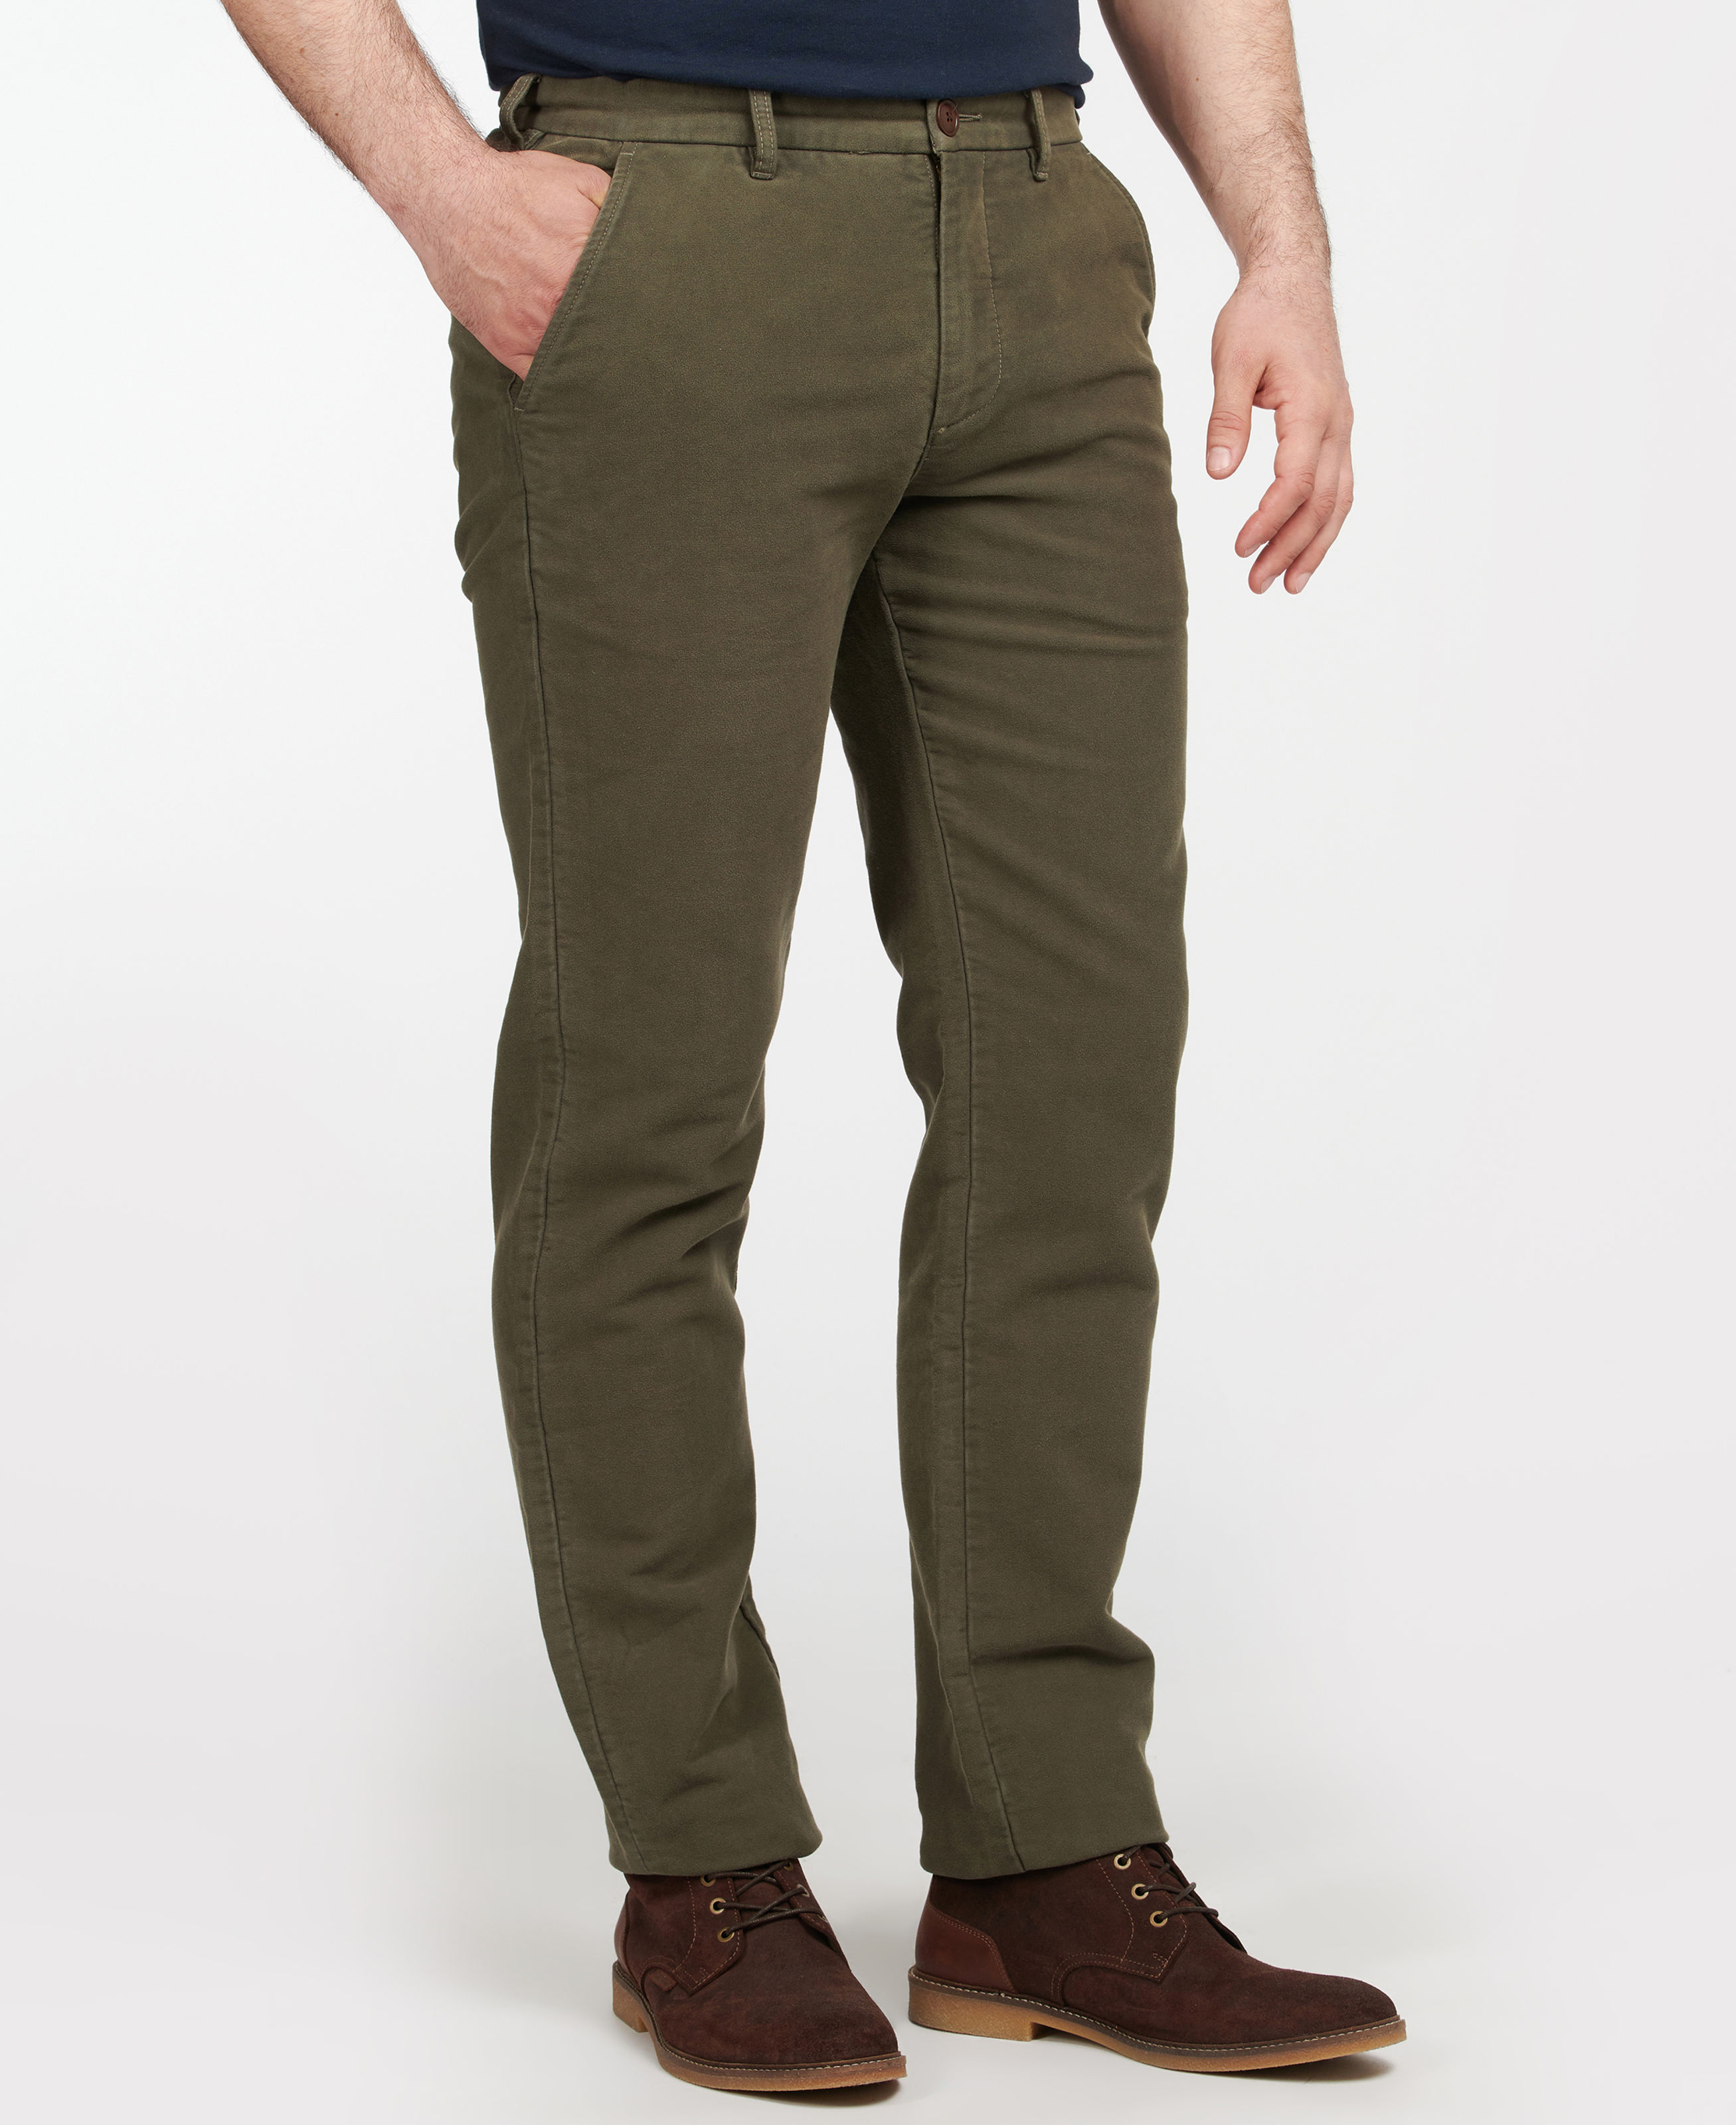 Mens Trousers | Cords, Moleskins, Shooting | New Forest Clothing